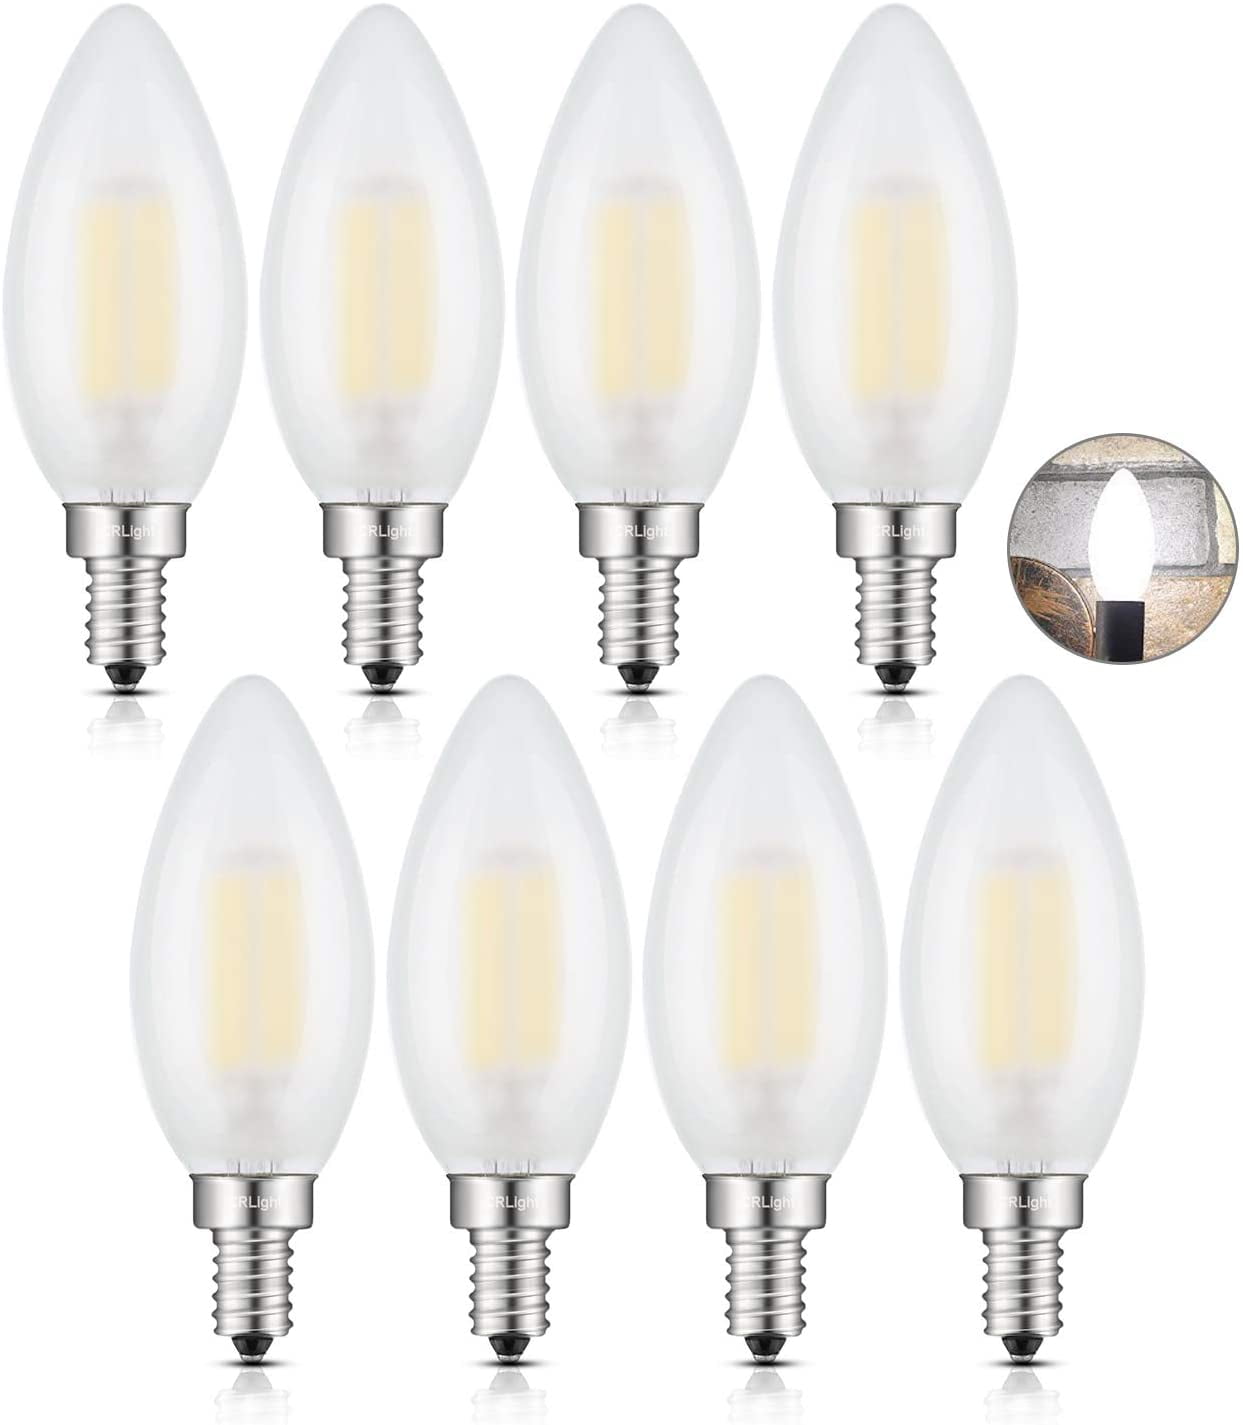 600LM Of 4000K Daylight Dimmable E12 Candelabra LED Bulbs 60W Equivalent 6W 